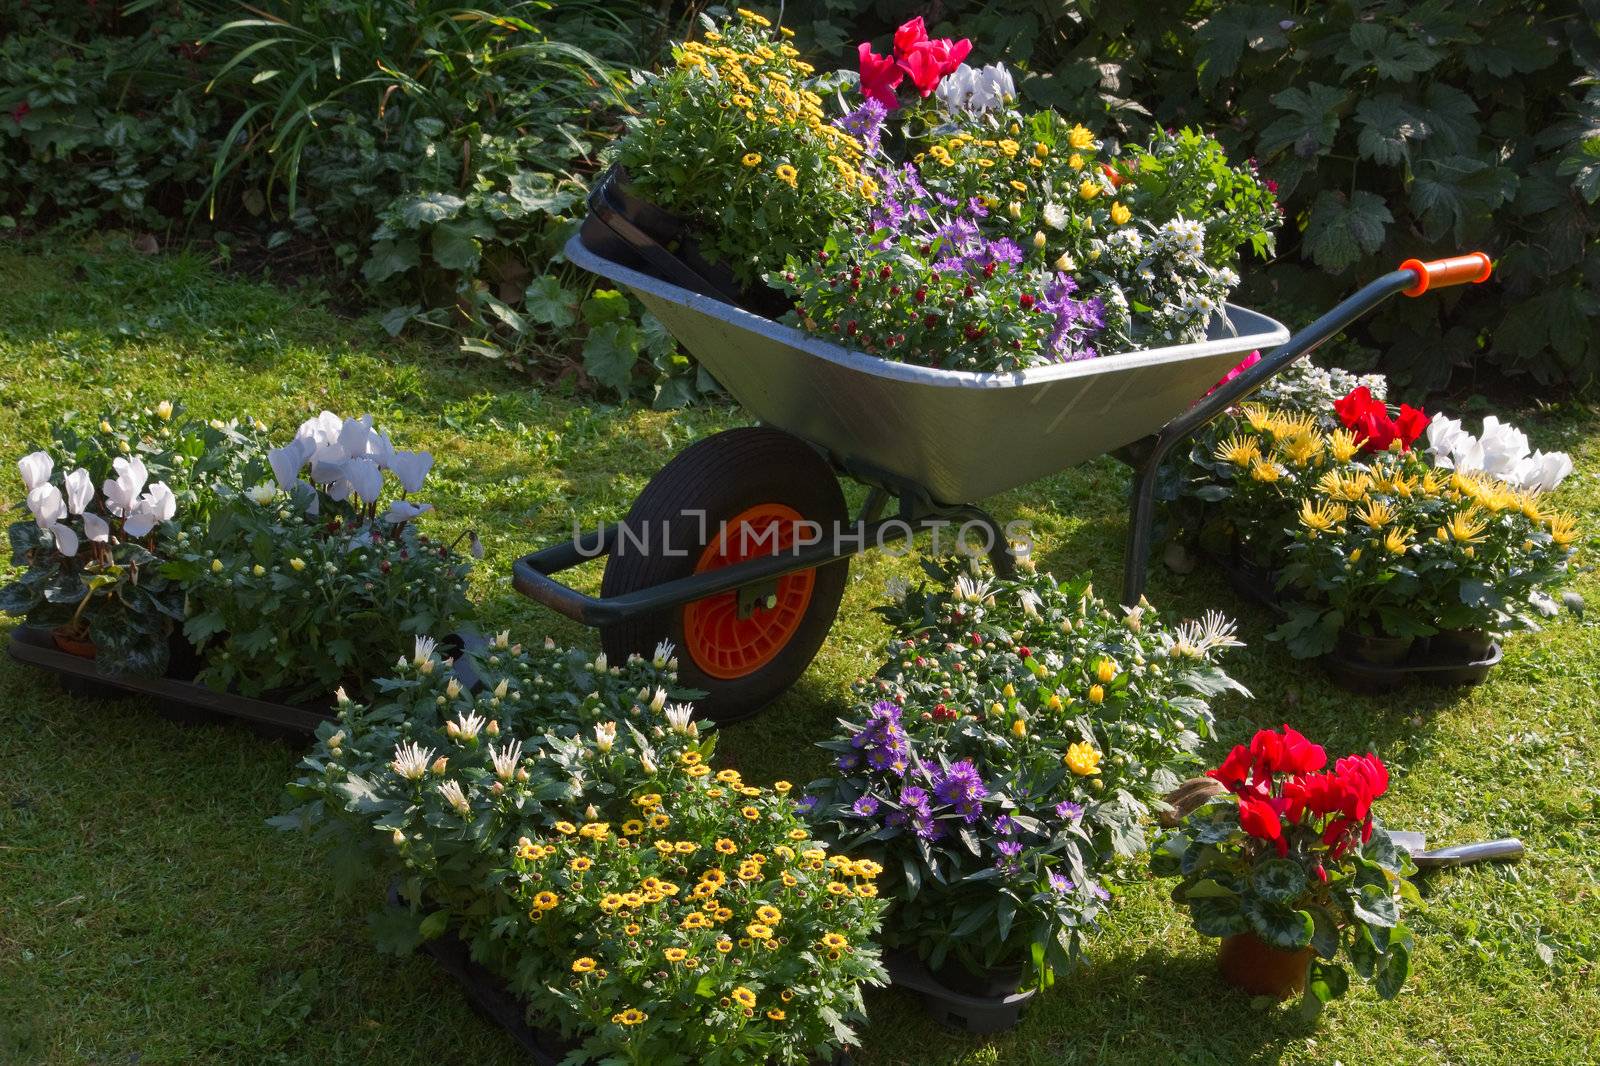 Wheelbarrow and trays with new plants - preparing for planting new plants in the garden on early September morning